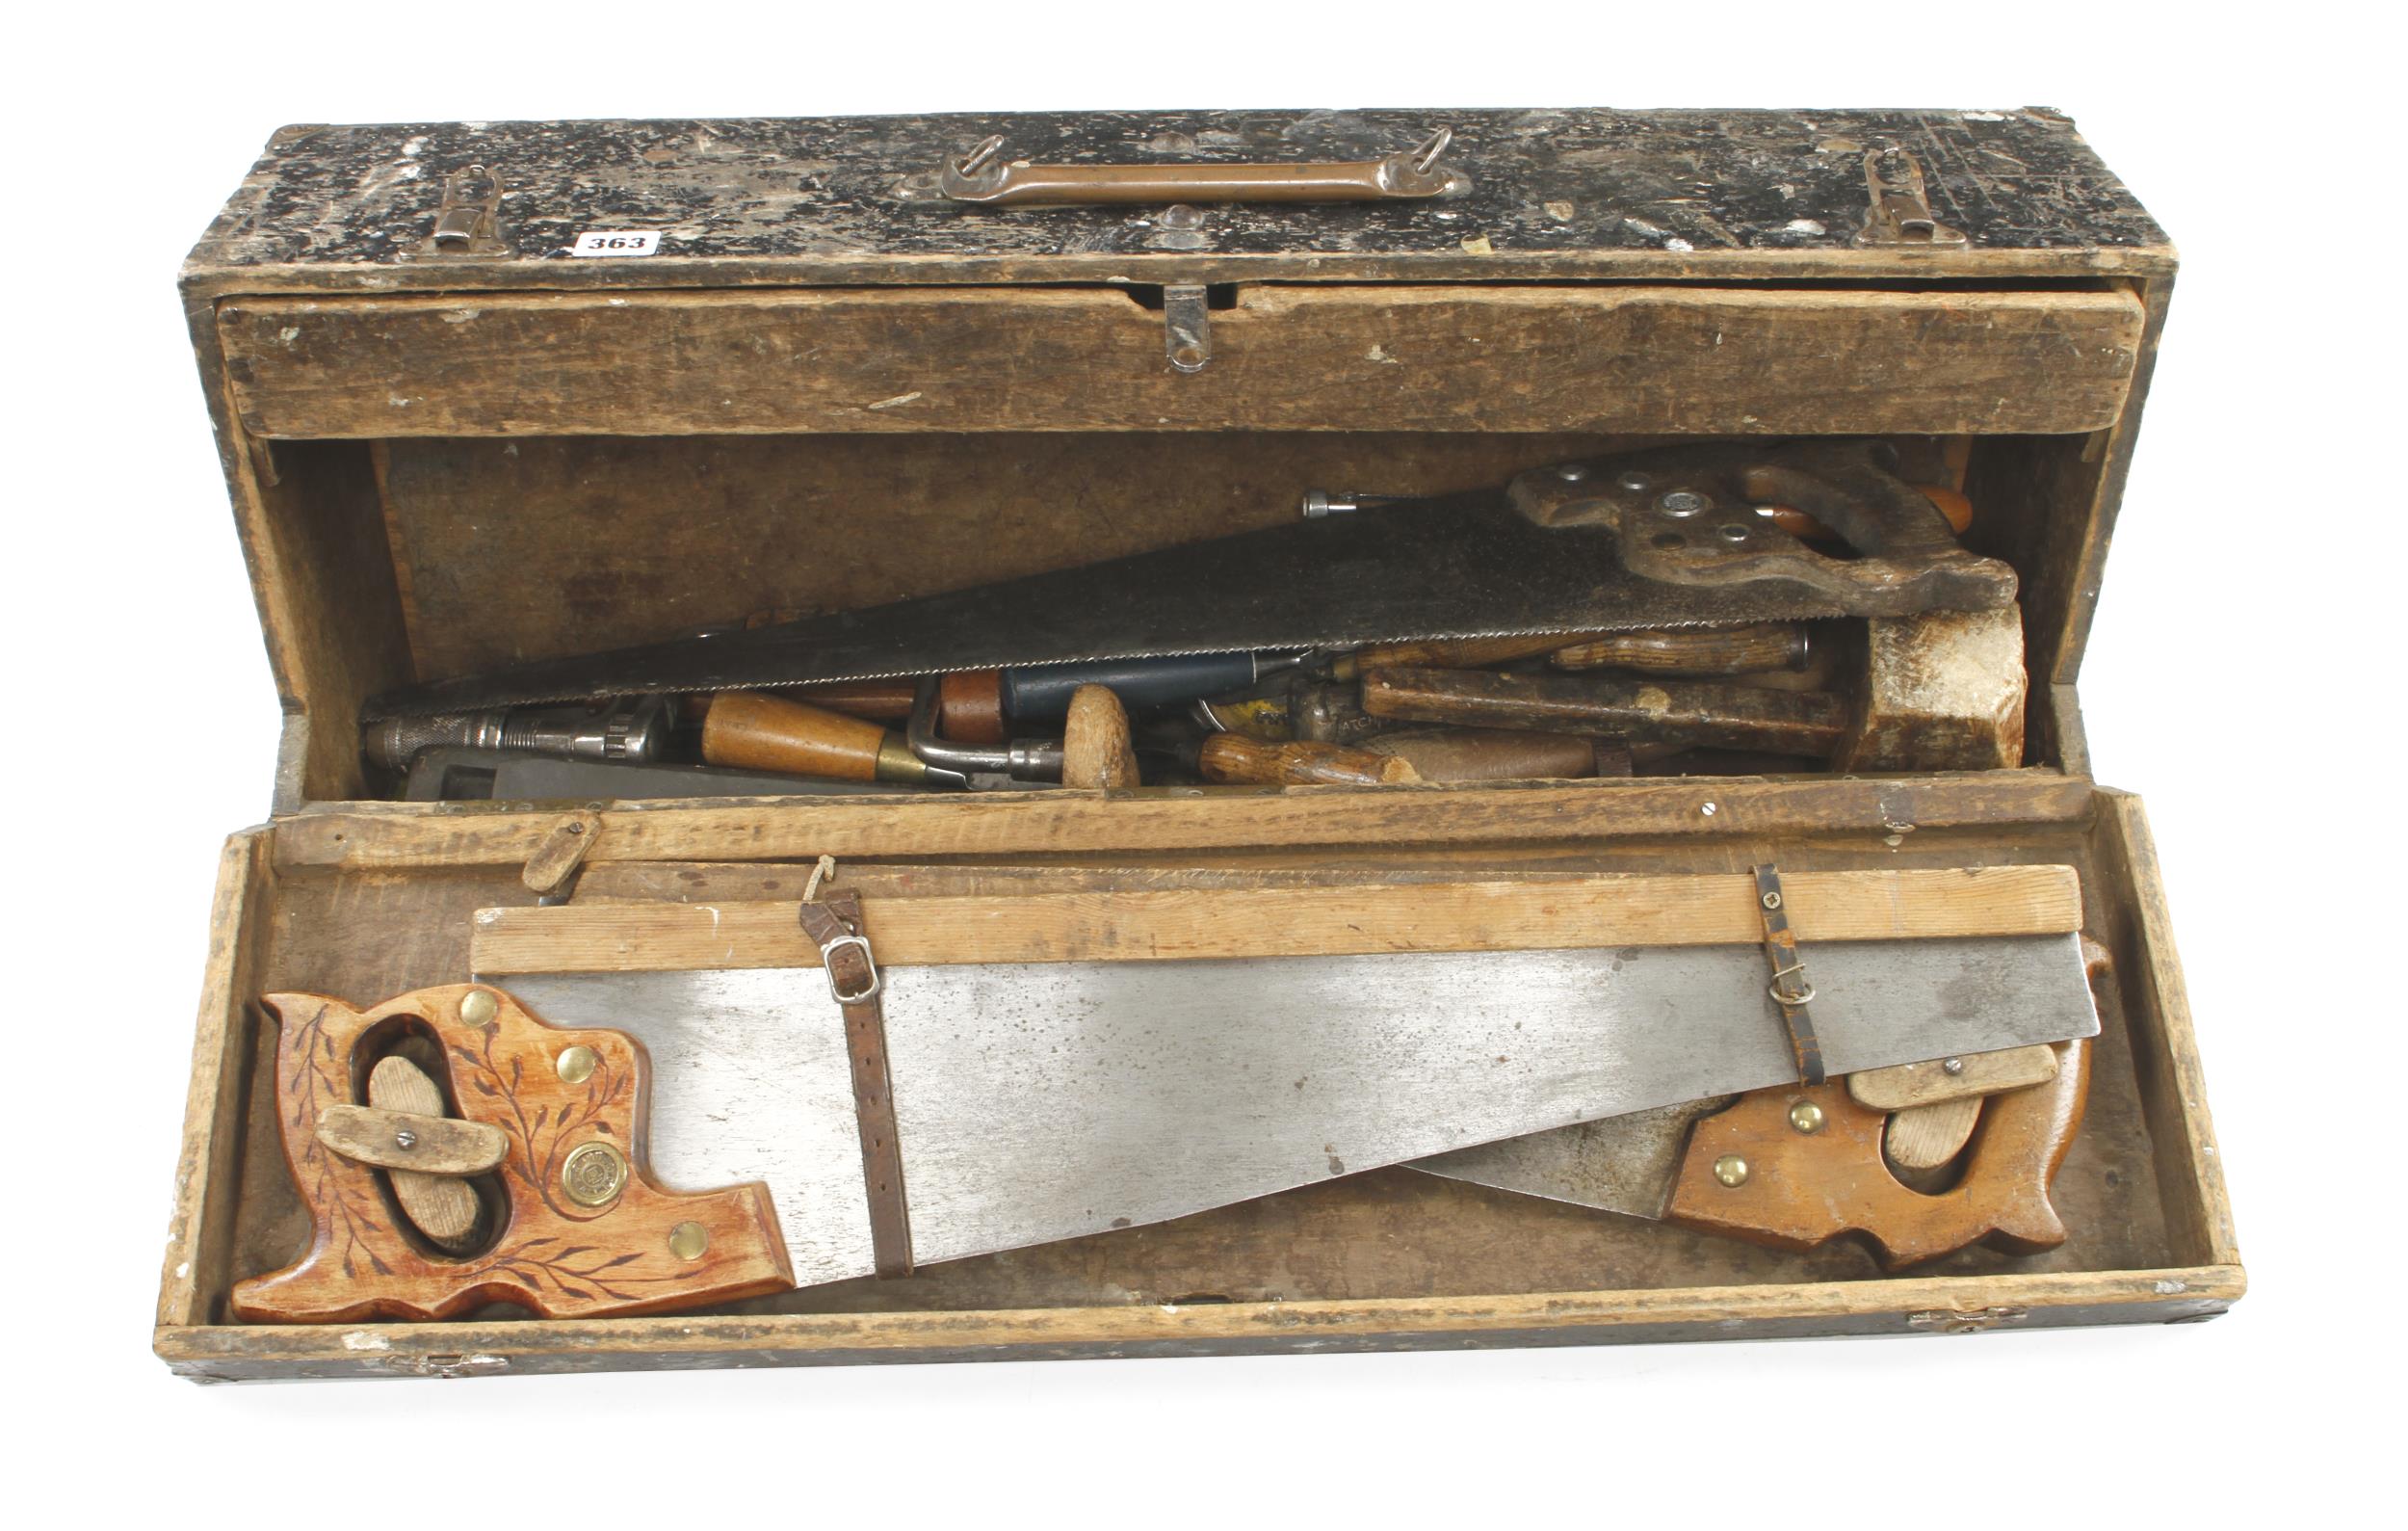 A joiner's carrying case 30" x 13" x 8" with some tools G